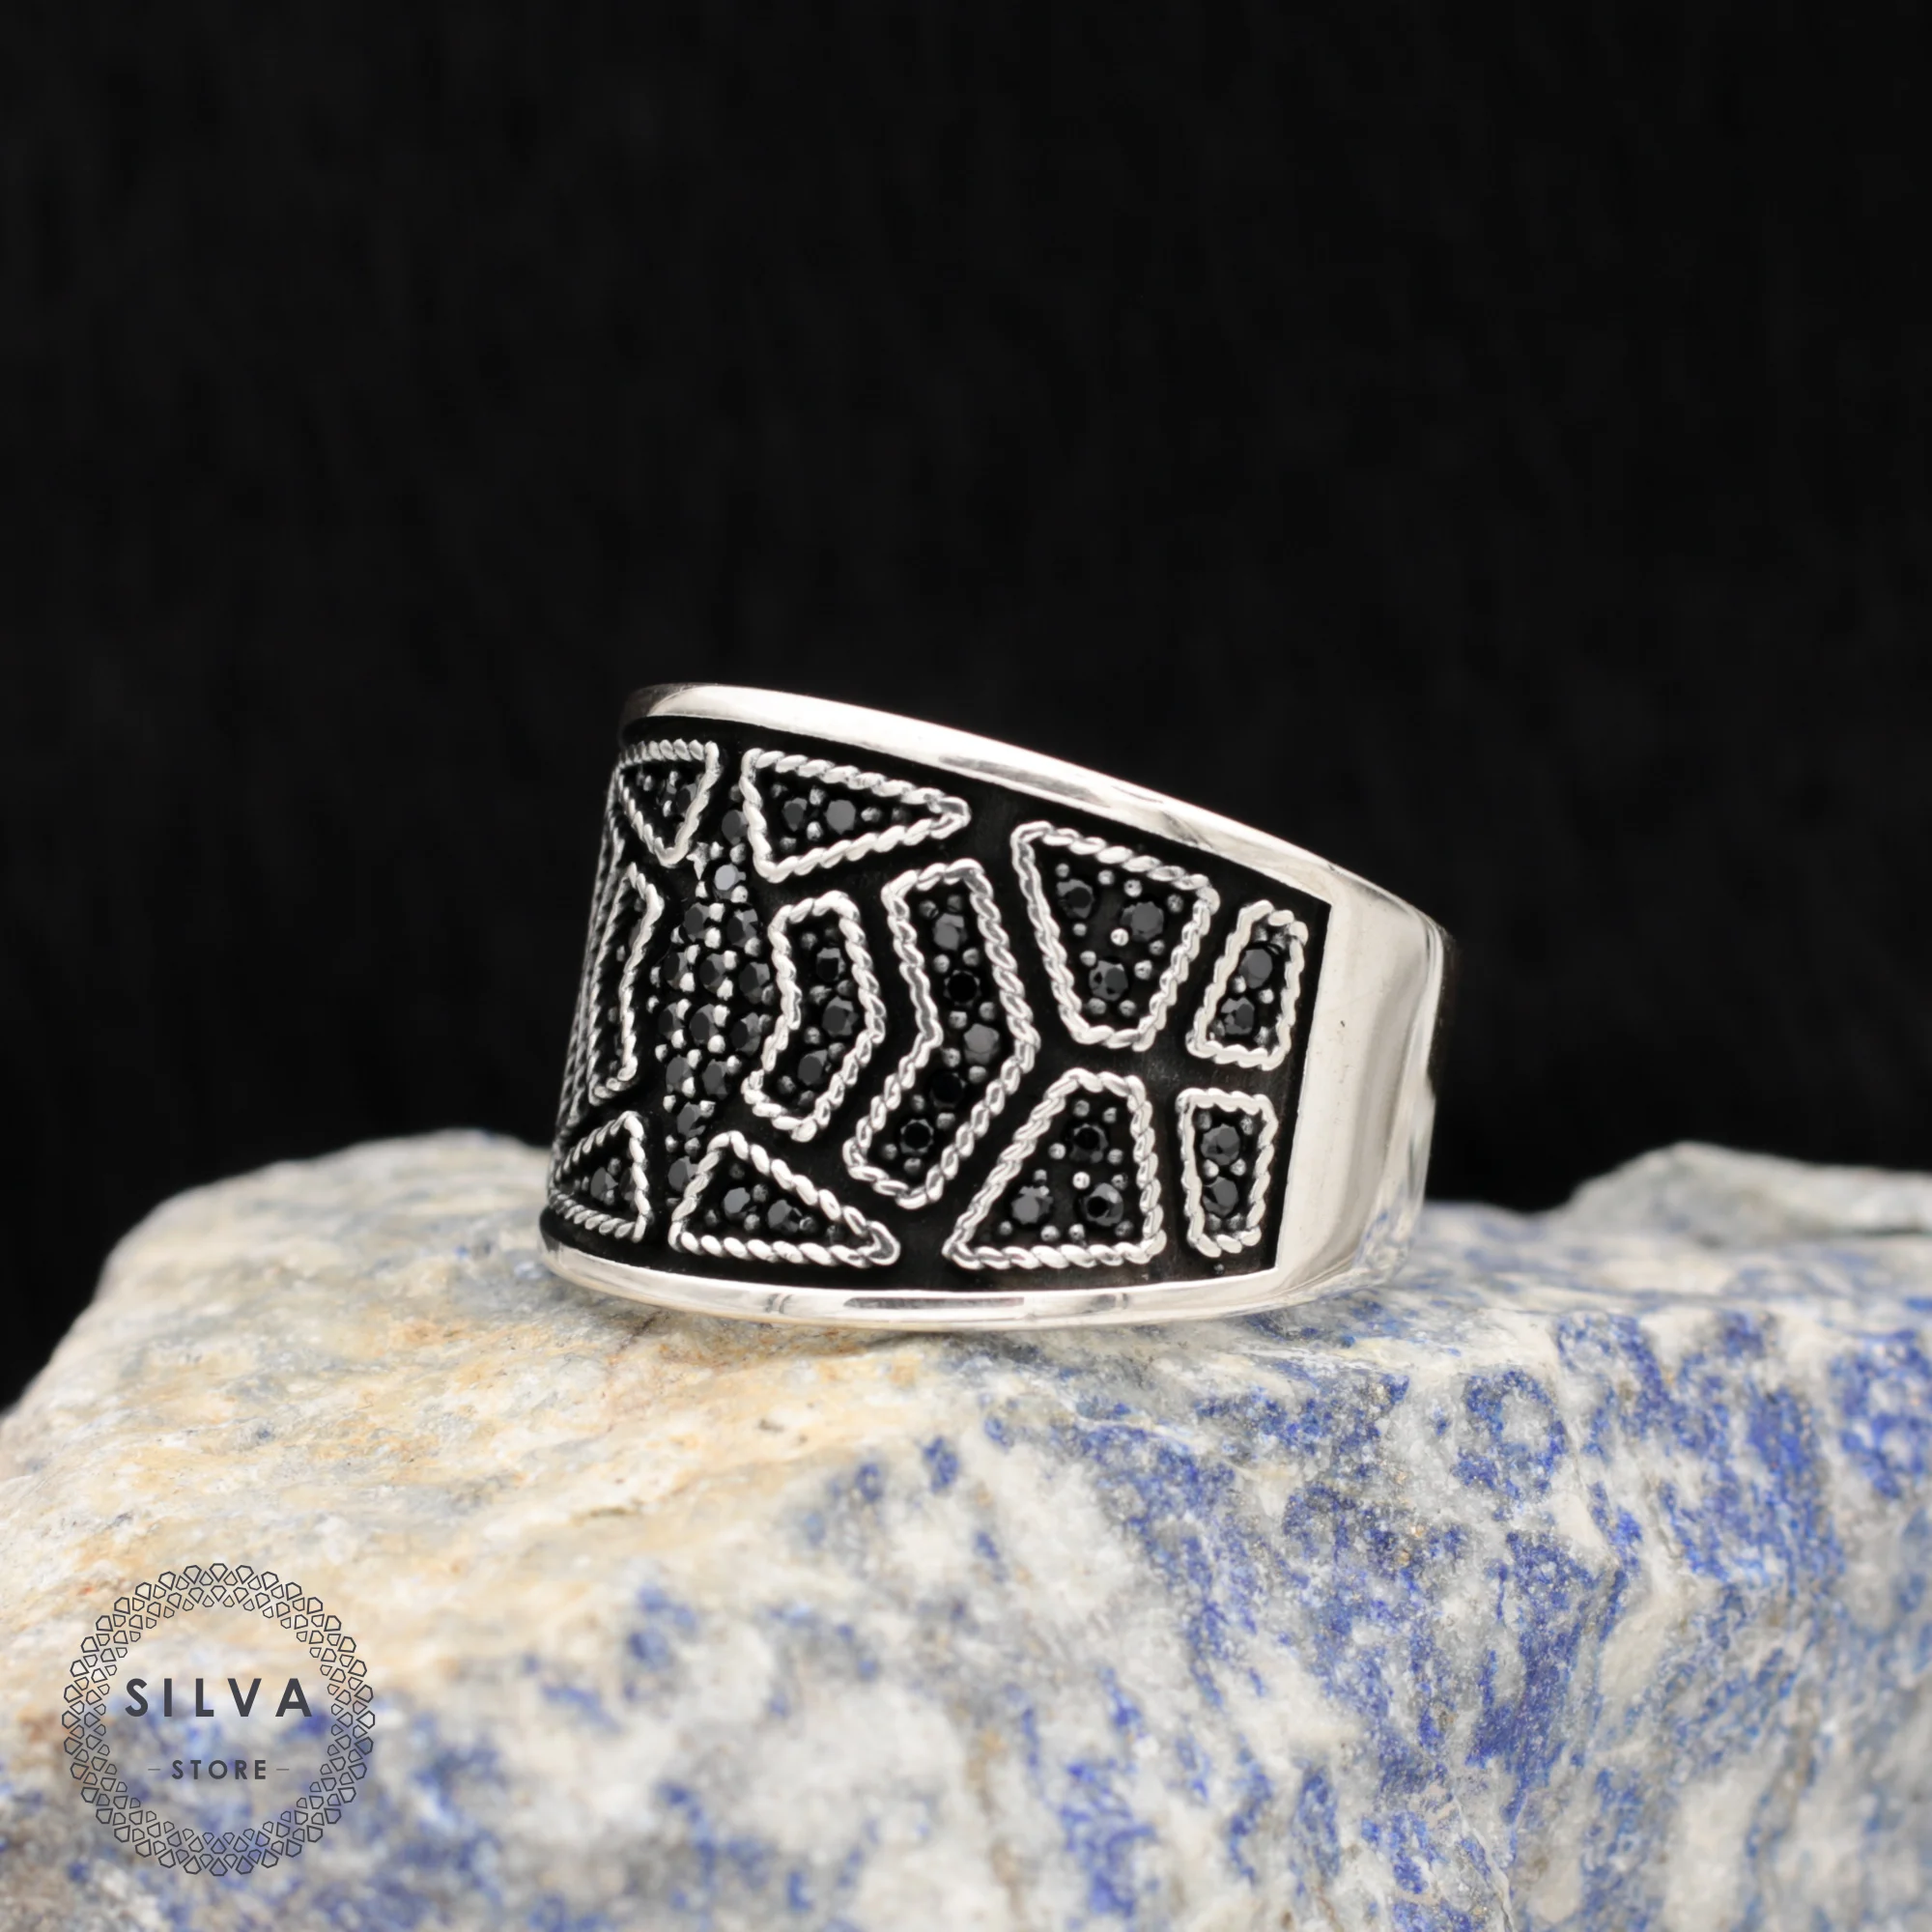 

Pure Sterling 925 Silver Men's Ring With Zircon Stone. Man Jewellery Stamped With Silver Stamp 925 All Sizes Are Available